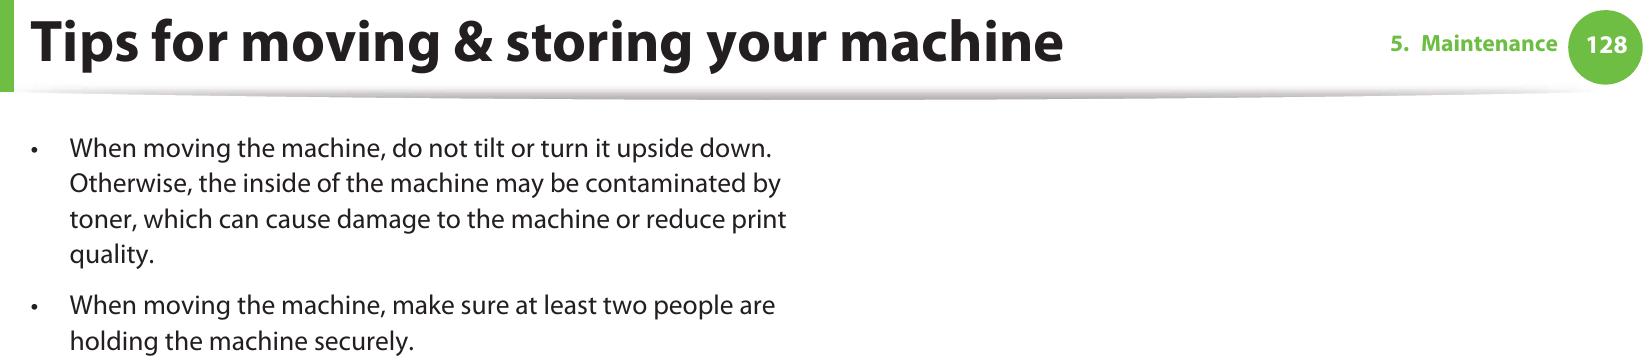 1285. MaintenanceTips for moving &amp; storing your machine• When moving the machine, do not tilt or turn it upside down. Otherwise, the inside of the machine may be contaminated by toner, which can cause damage to the machine or reduce print quality.• When moving the machine, make sure at least two people are holding the machine securely. 